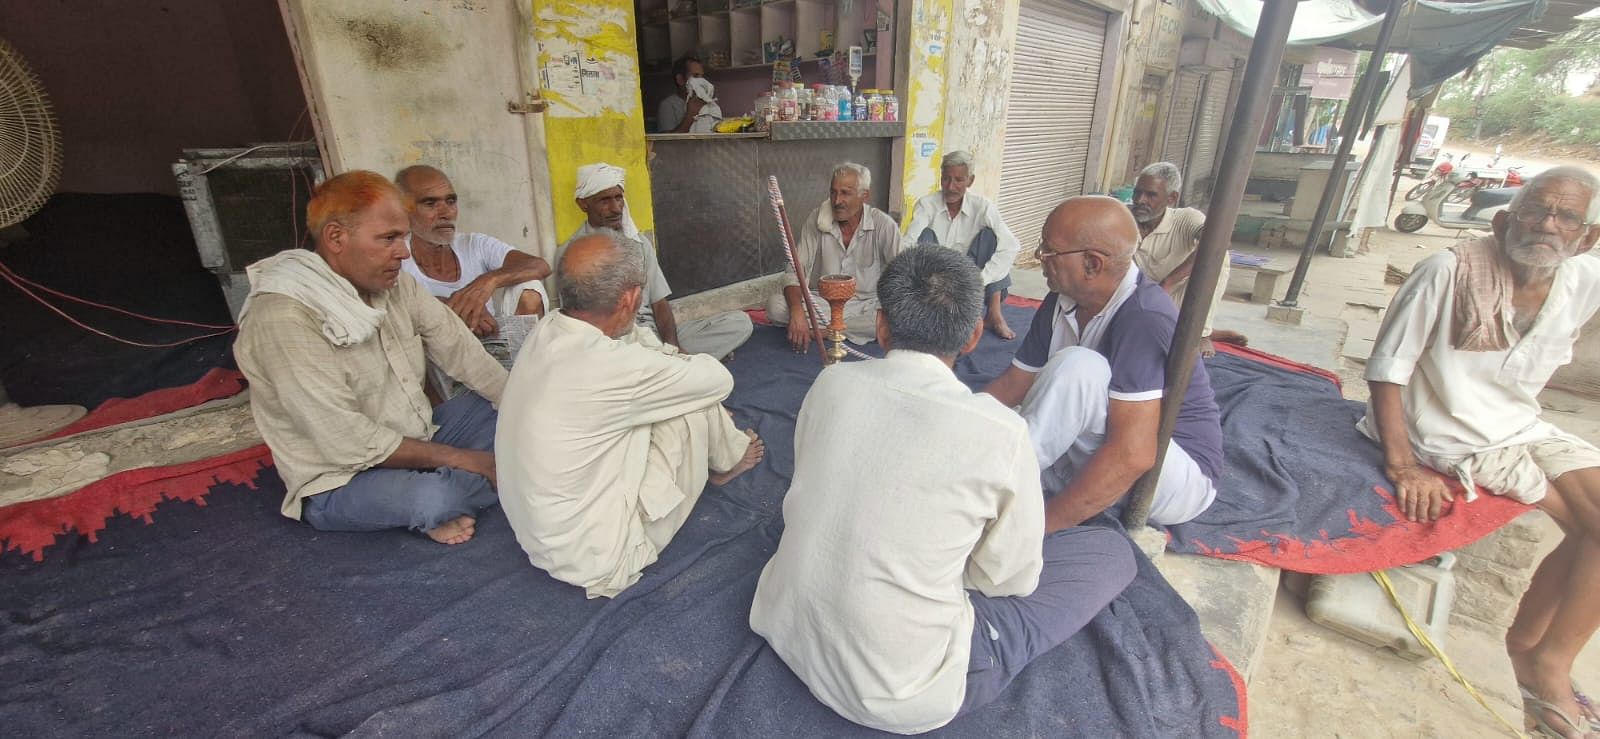 Villagers of Dholera village in Mahendragarh have gathered to discuss a pressing issue: how to get their honour back.